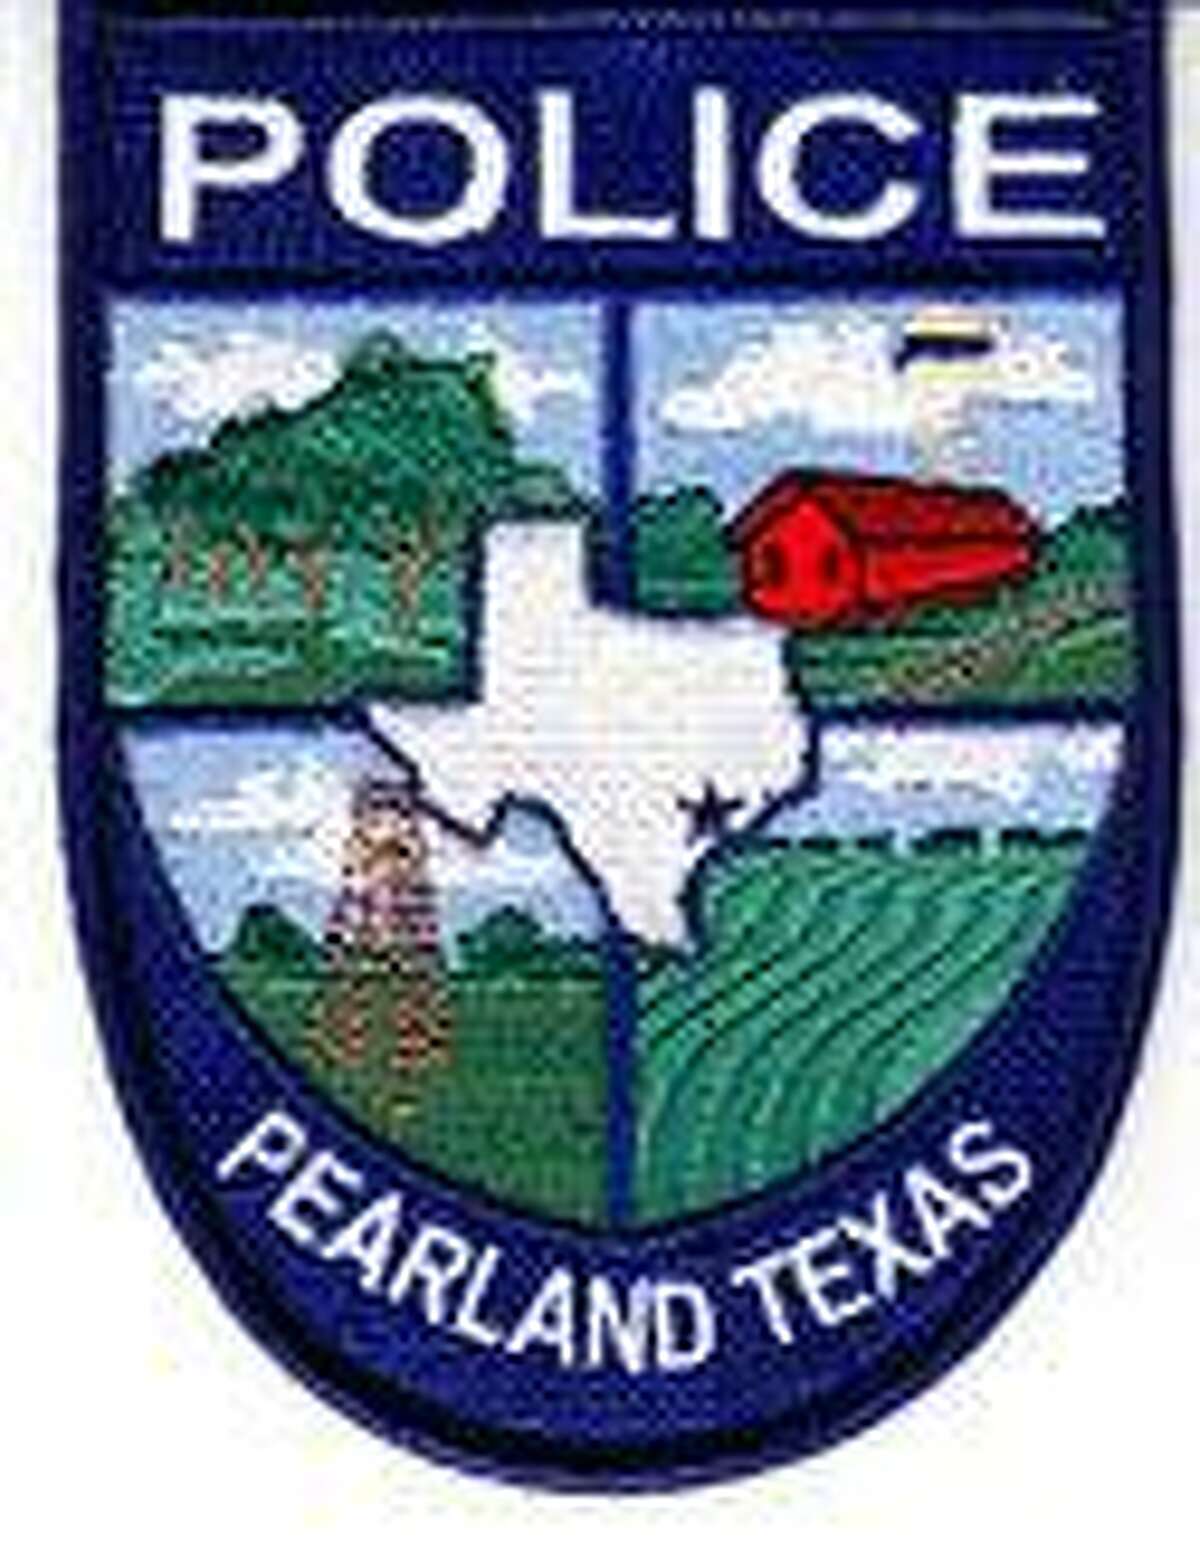 Pearland residents asked to provide artifacts for depot museum